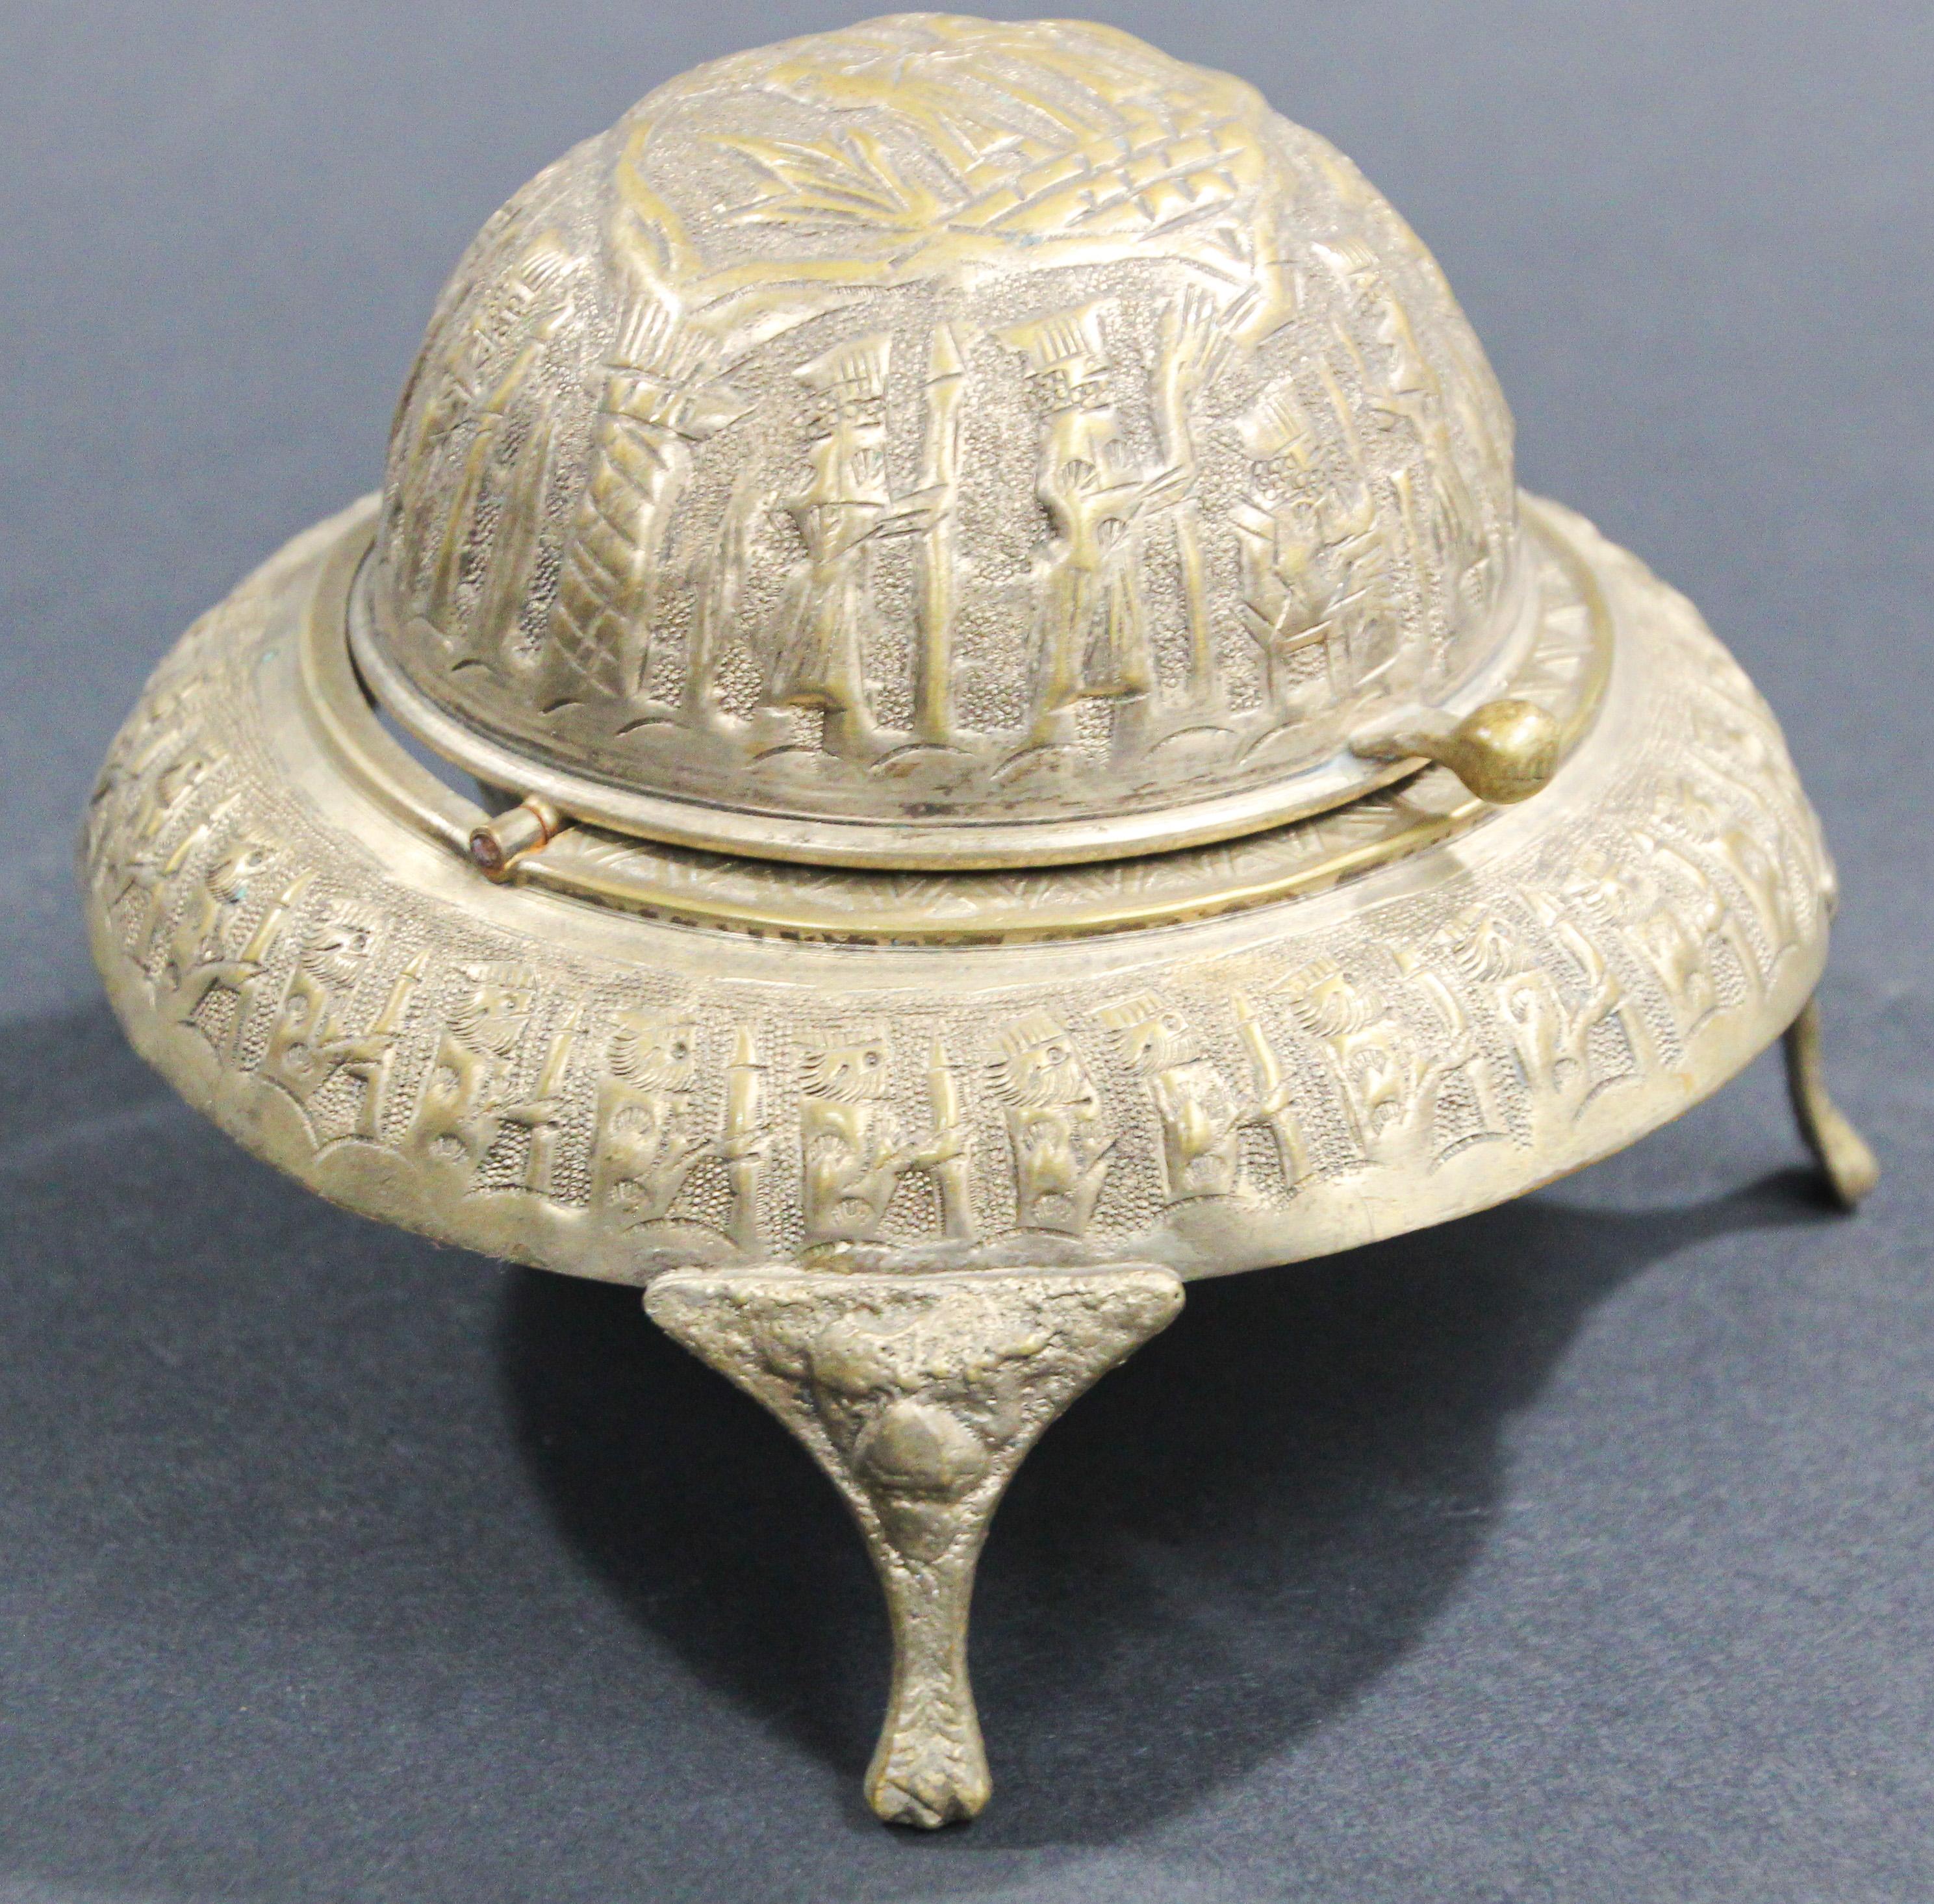 Serve caviar in the most appropriate manner with this handcrafted Middle Eastern Moorish caviar bowl.
Handcrafted brass bowl, roll top round dome with very ornate Persian style design.
This footed presentation brass dish is the perfect server to